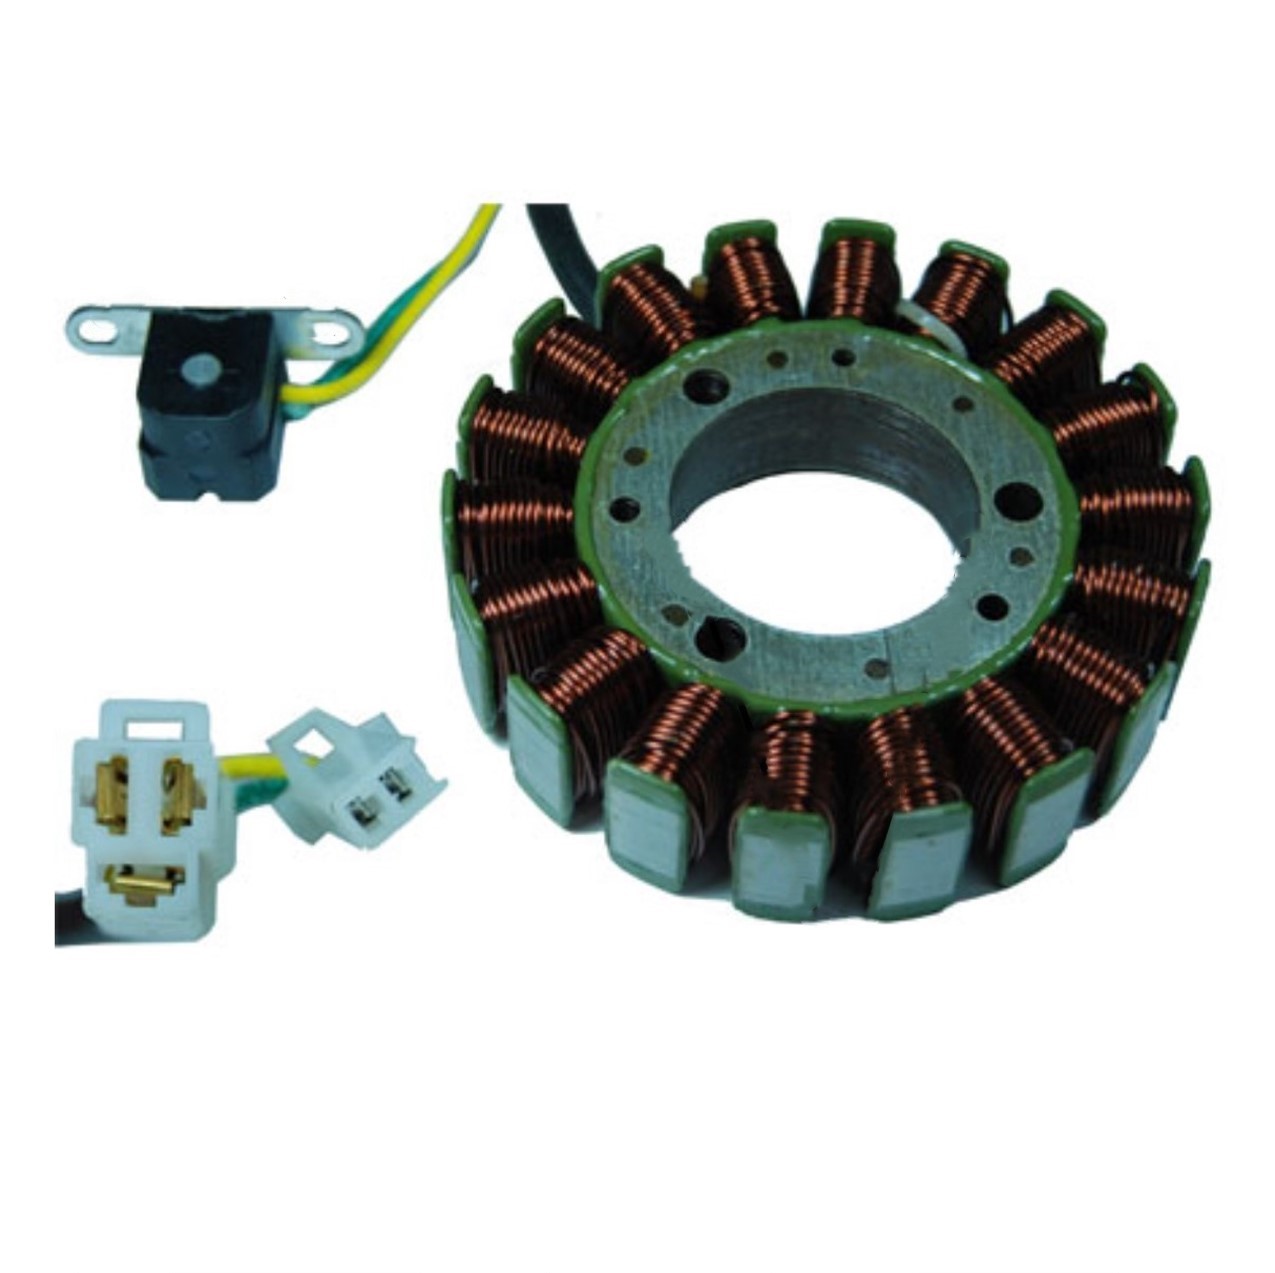 STATOR 150-250cc 4 Stroke 18 Coil OD=93 3 Pin in 3 Pin Male Jack 2 Pin in 2 Pin Male Jack H=23 Ctr Hole ID=35 Pickup Coil Bolts c/c37 - Click Image to Close